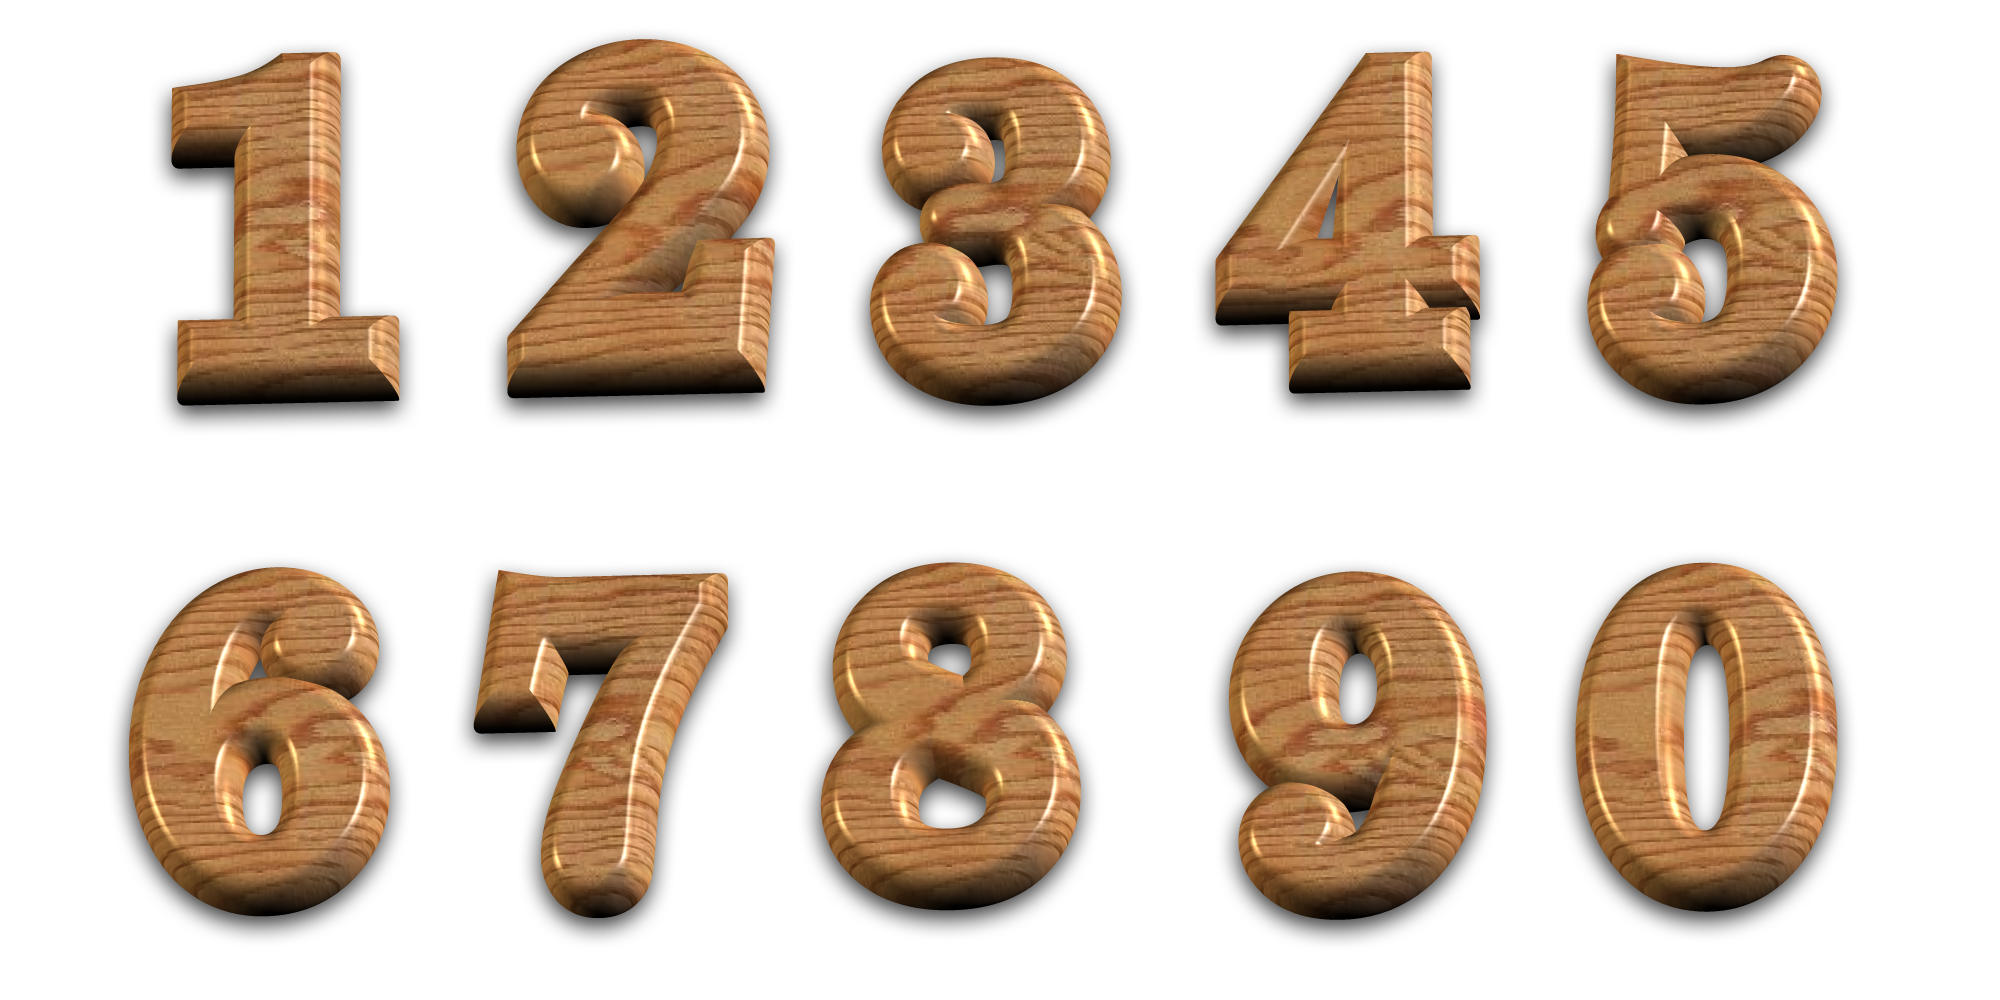 3D Polished Wooden Numbers With Transparent Backgr by PLACID85 on